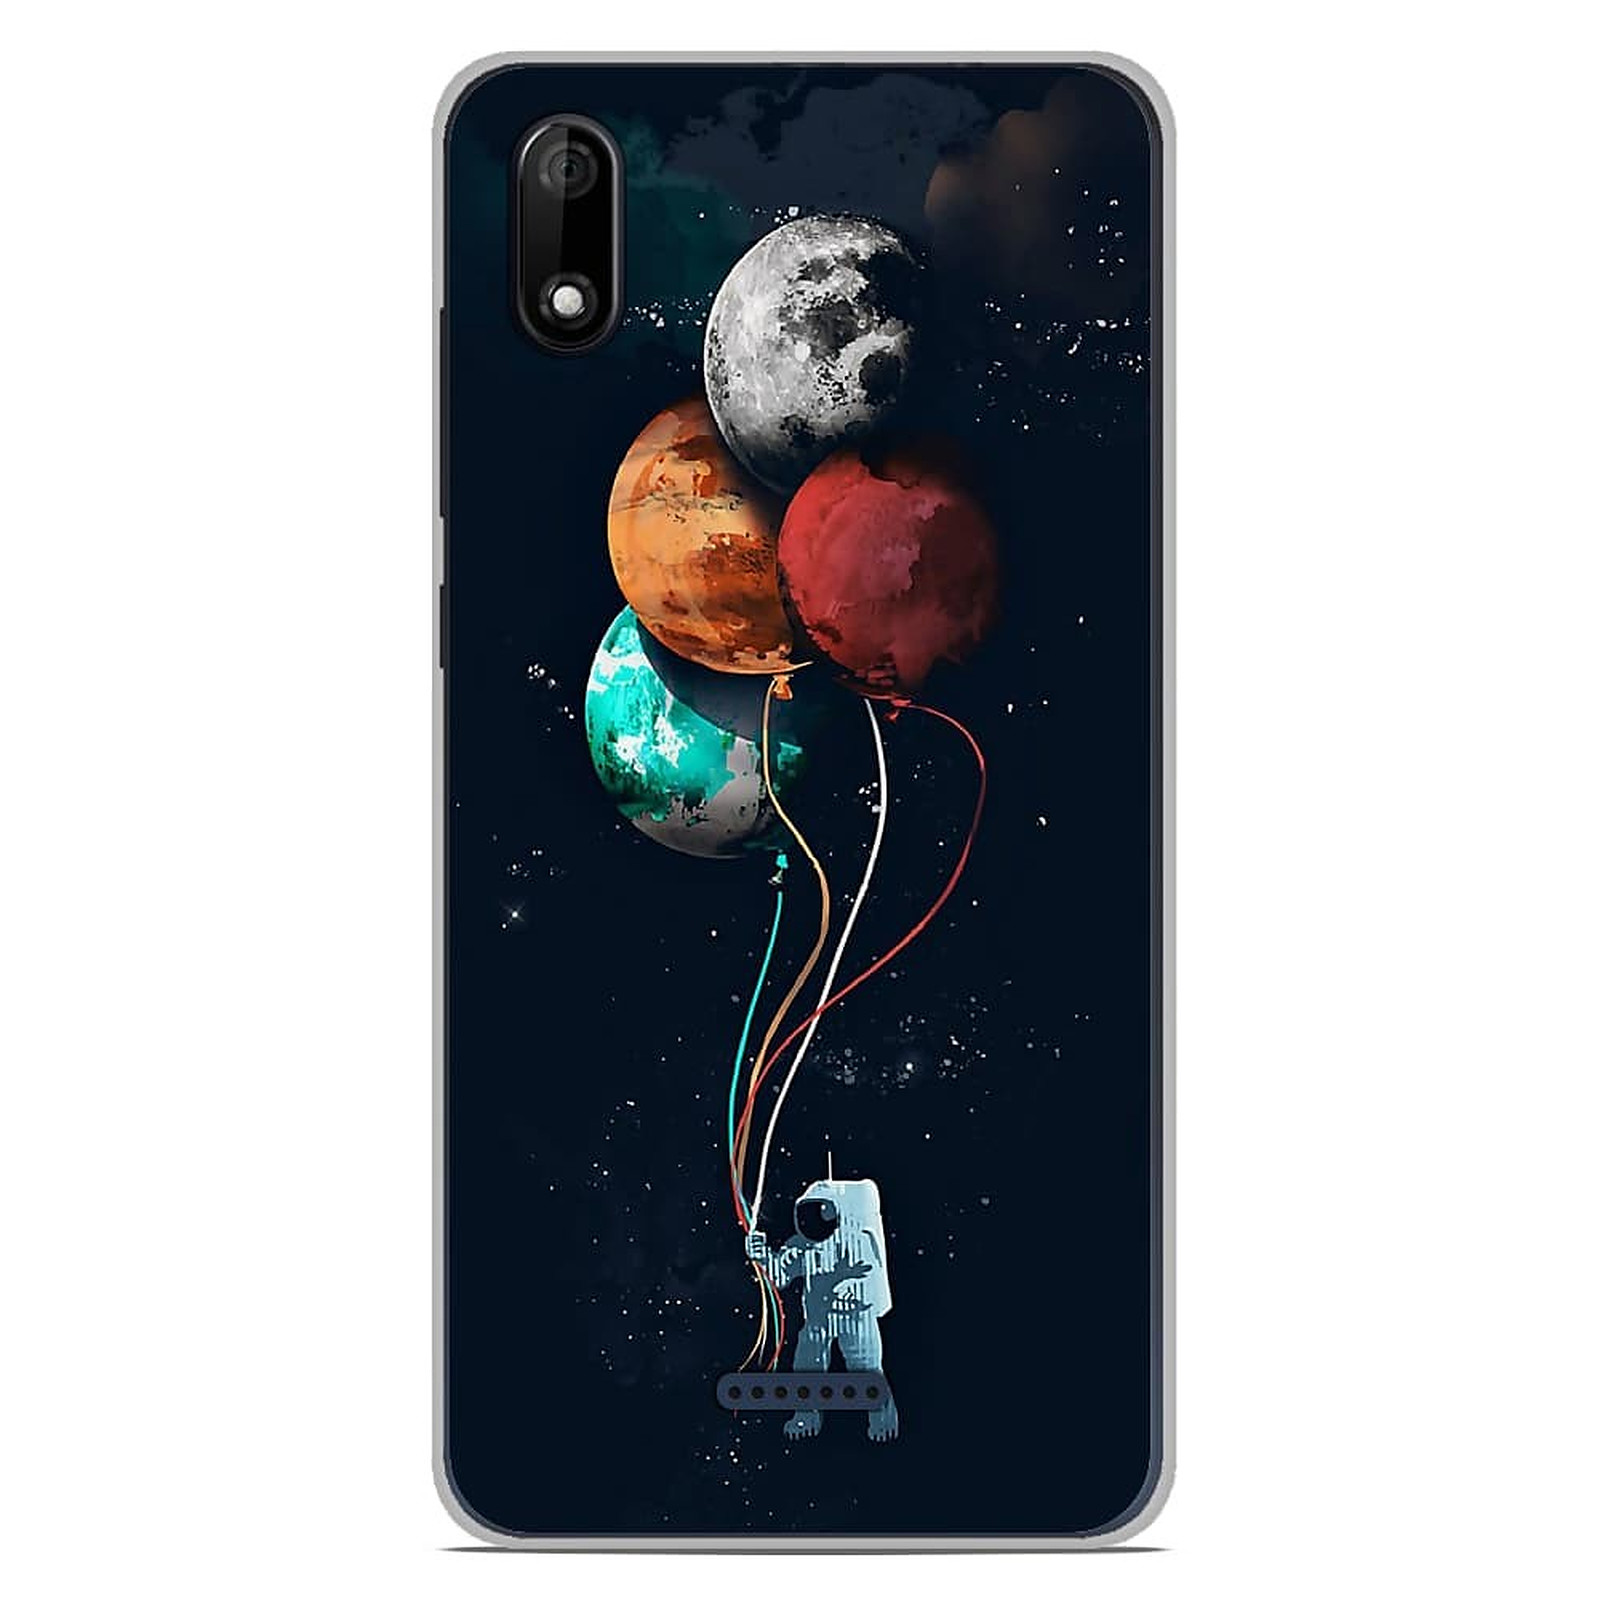 1001 Coques Coque silicone gel Wiko Y60 motif Cosmonaute aux Ballons - Coque telephone 1001Coques